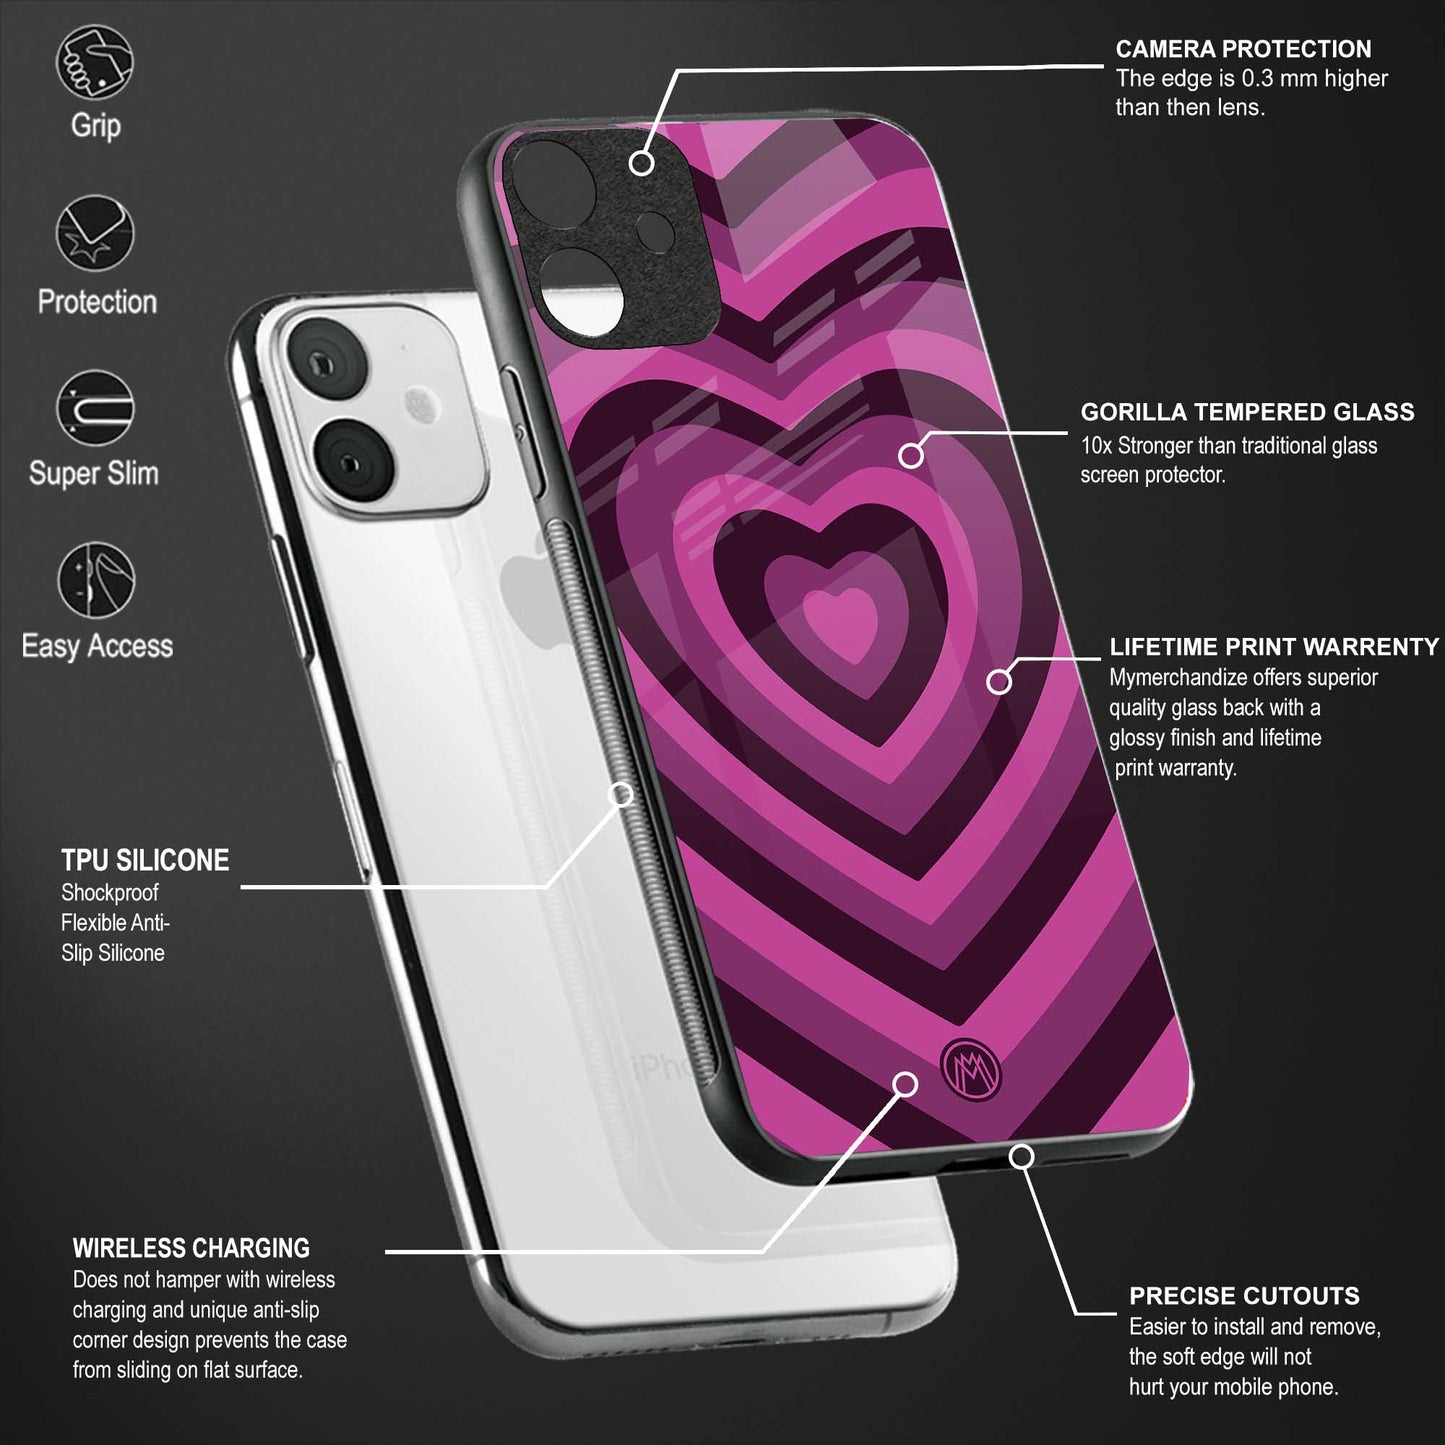 y2k burgundy hearts aesthetic back phone cover | glass case for oppo reno 8